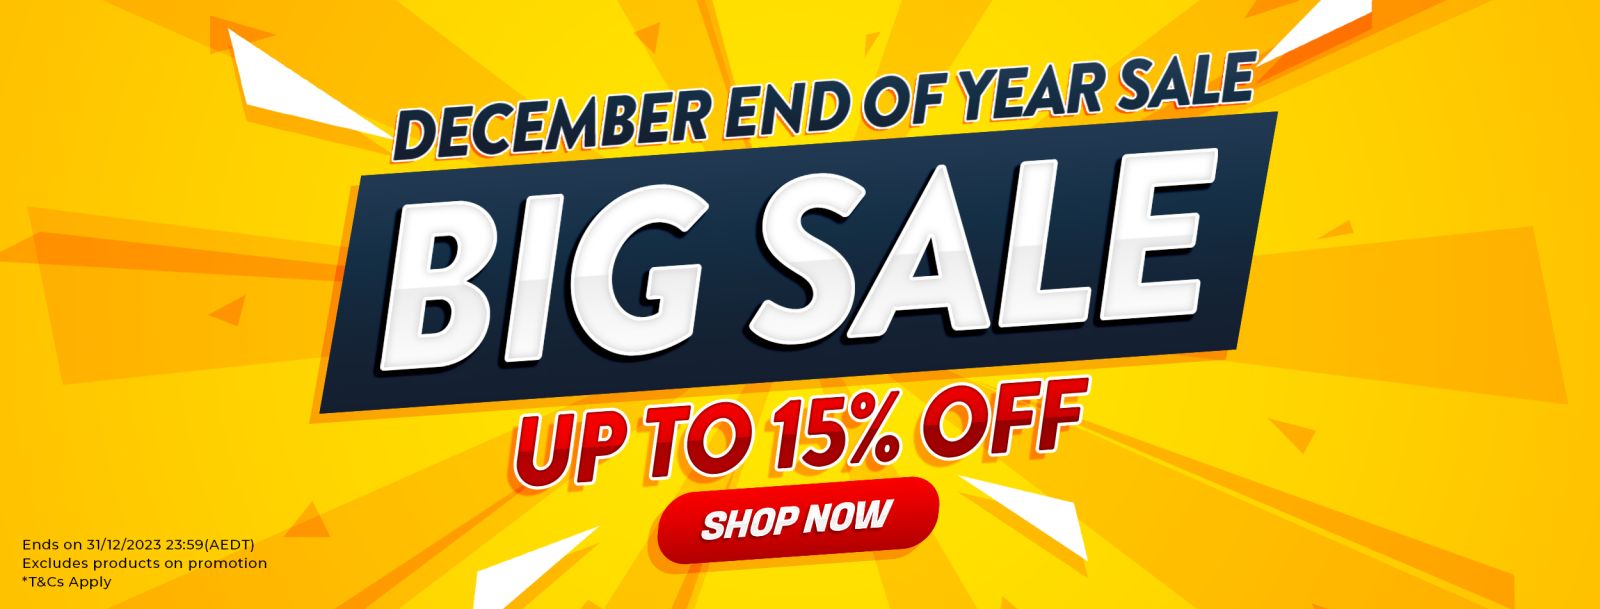 December End Of Year Sale